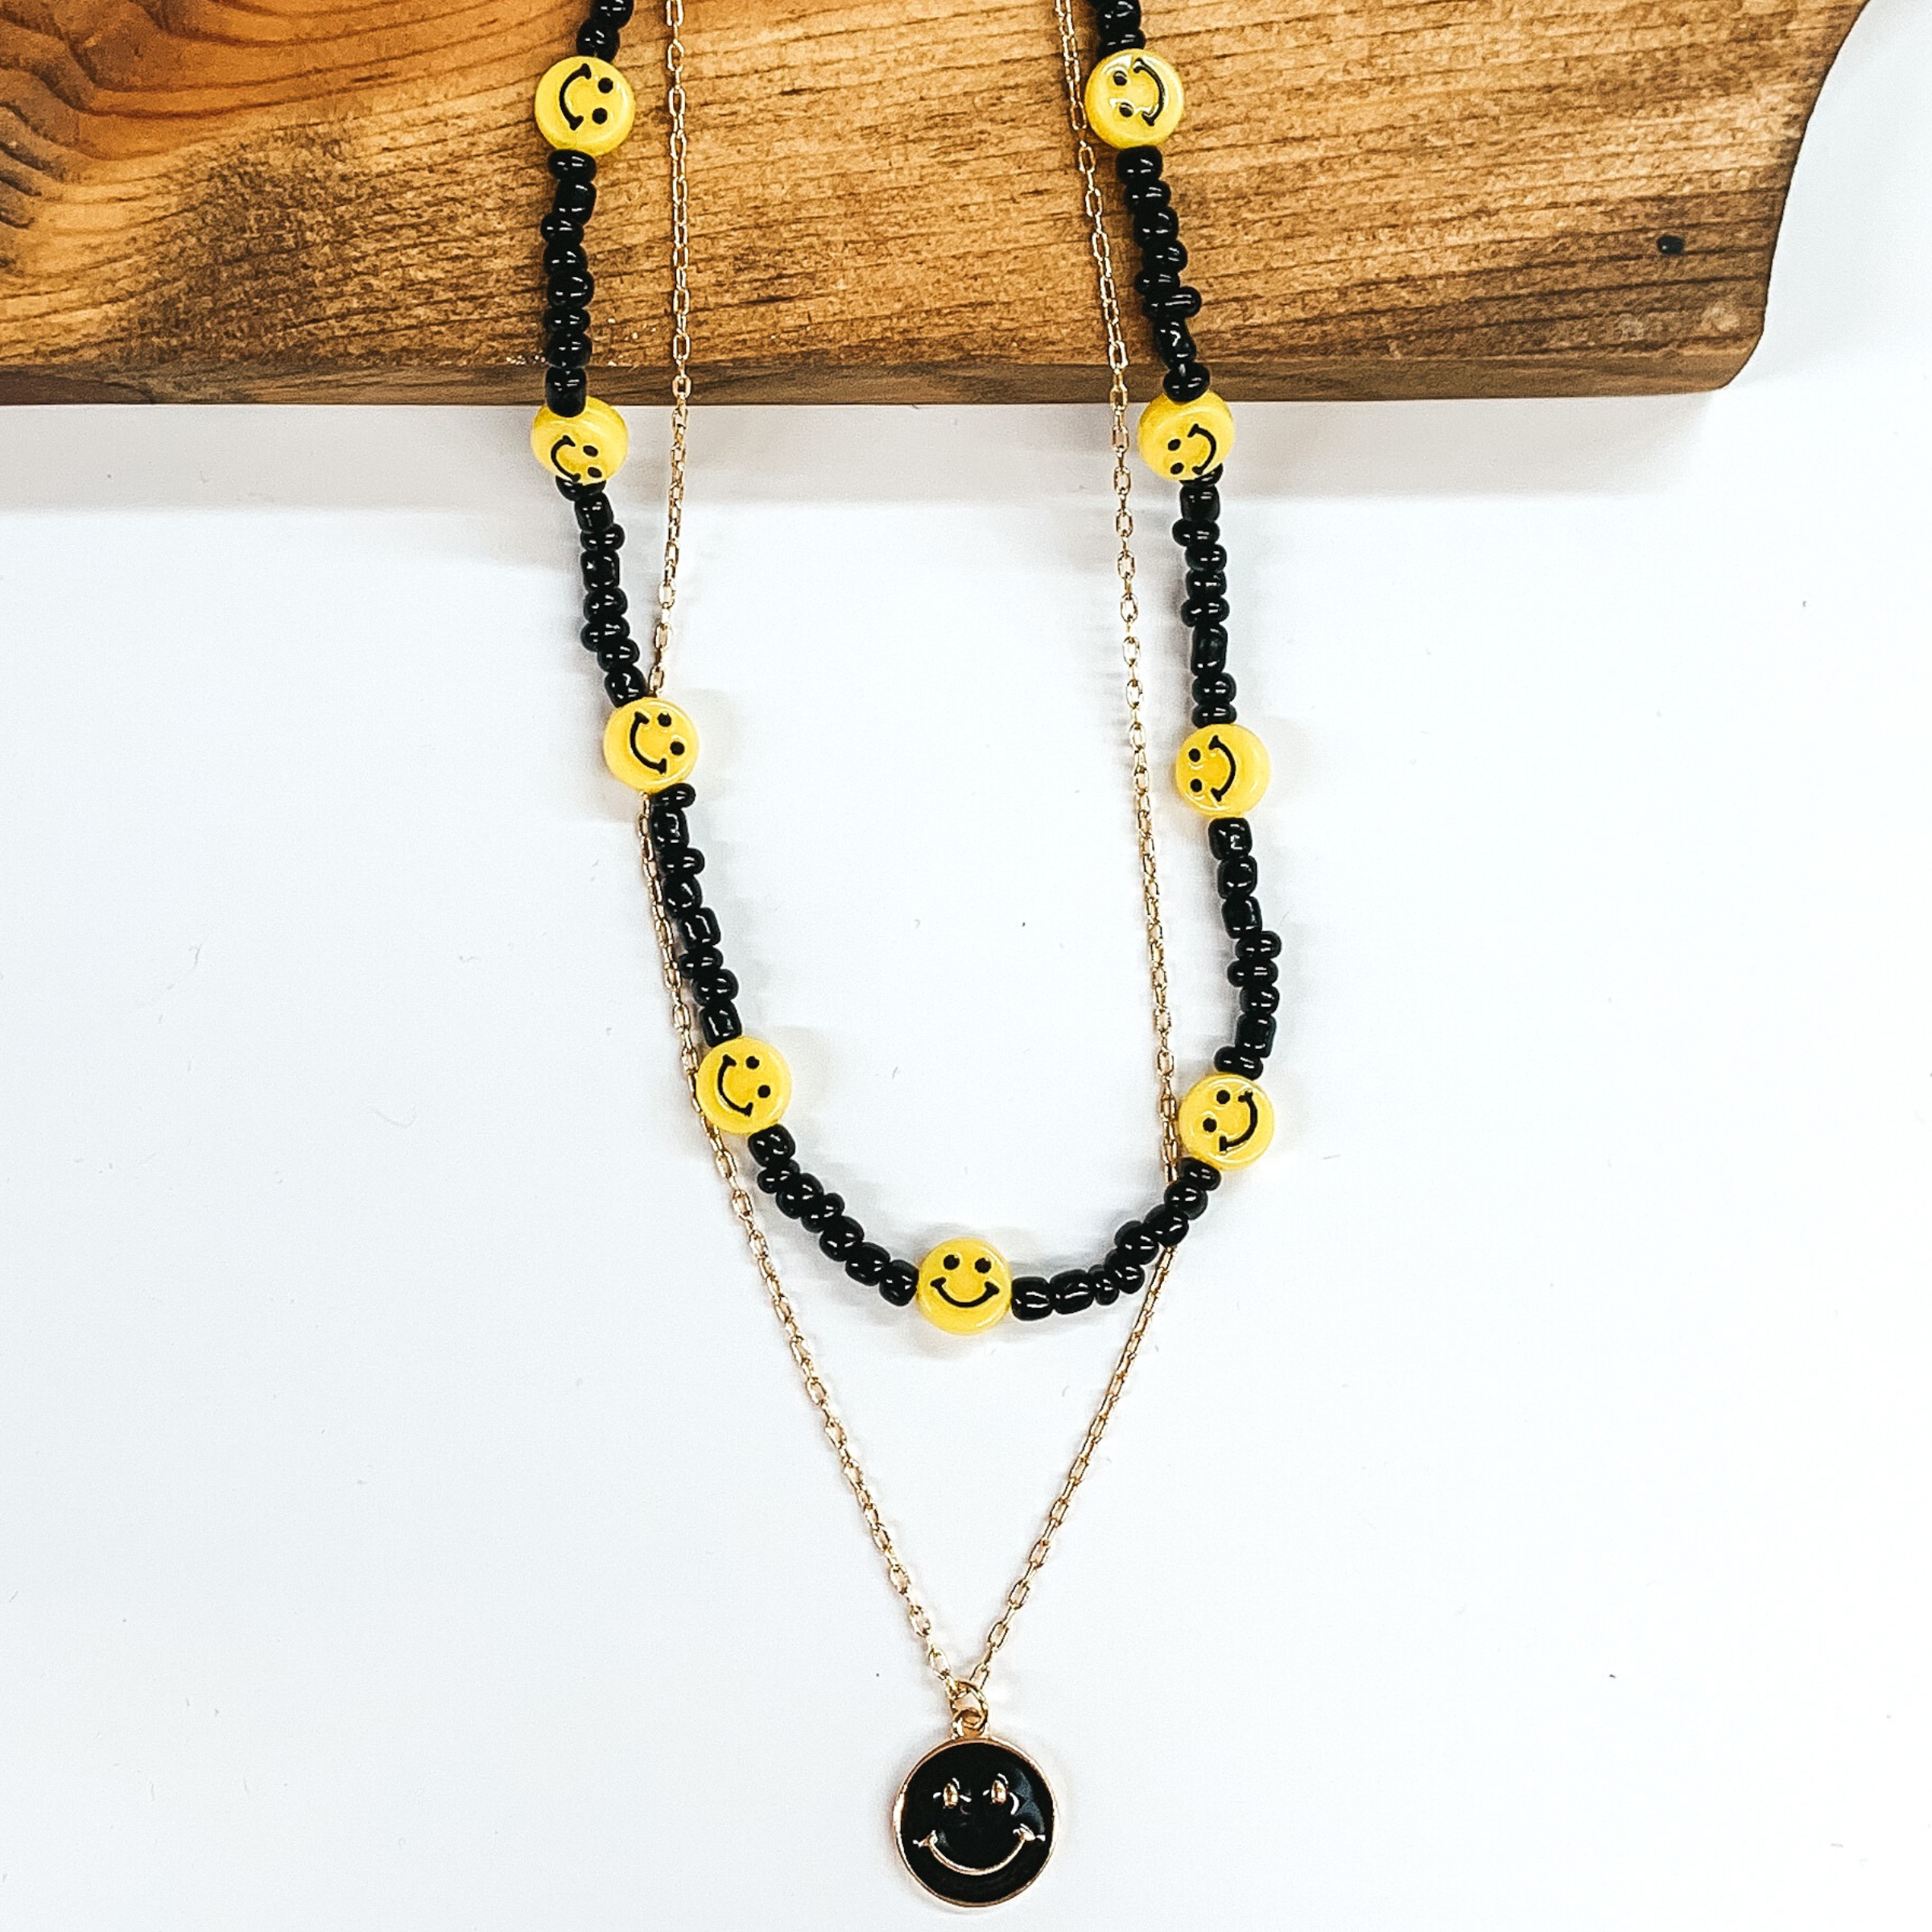 Double layered necklace. The black beaded strand has yellow smiley face charm spacers. The other strand is a gold chained necklace with a yellow circle pendant with a gold smiley face. This necklace is pictures partially laying on a dark piece of wood on a white background.